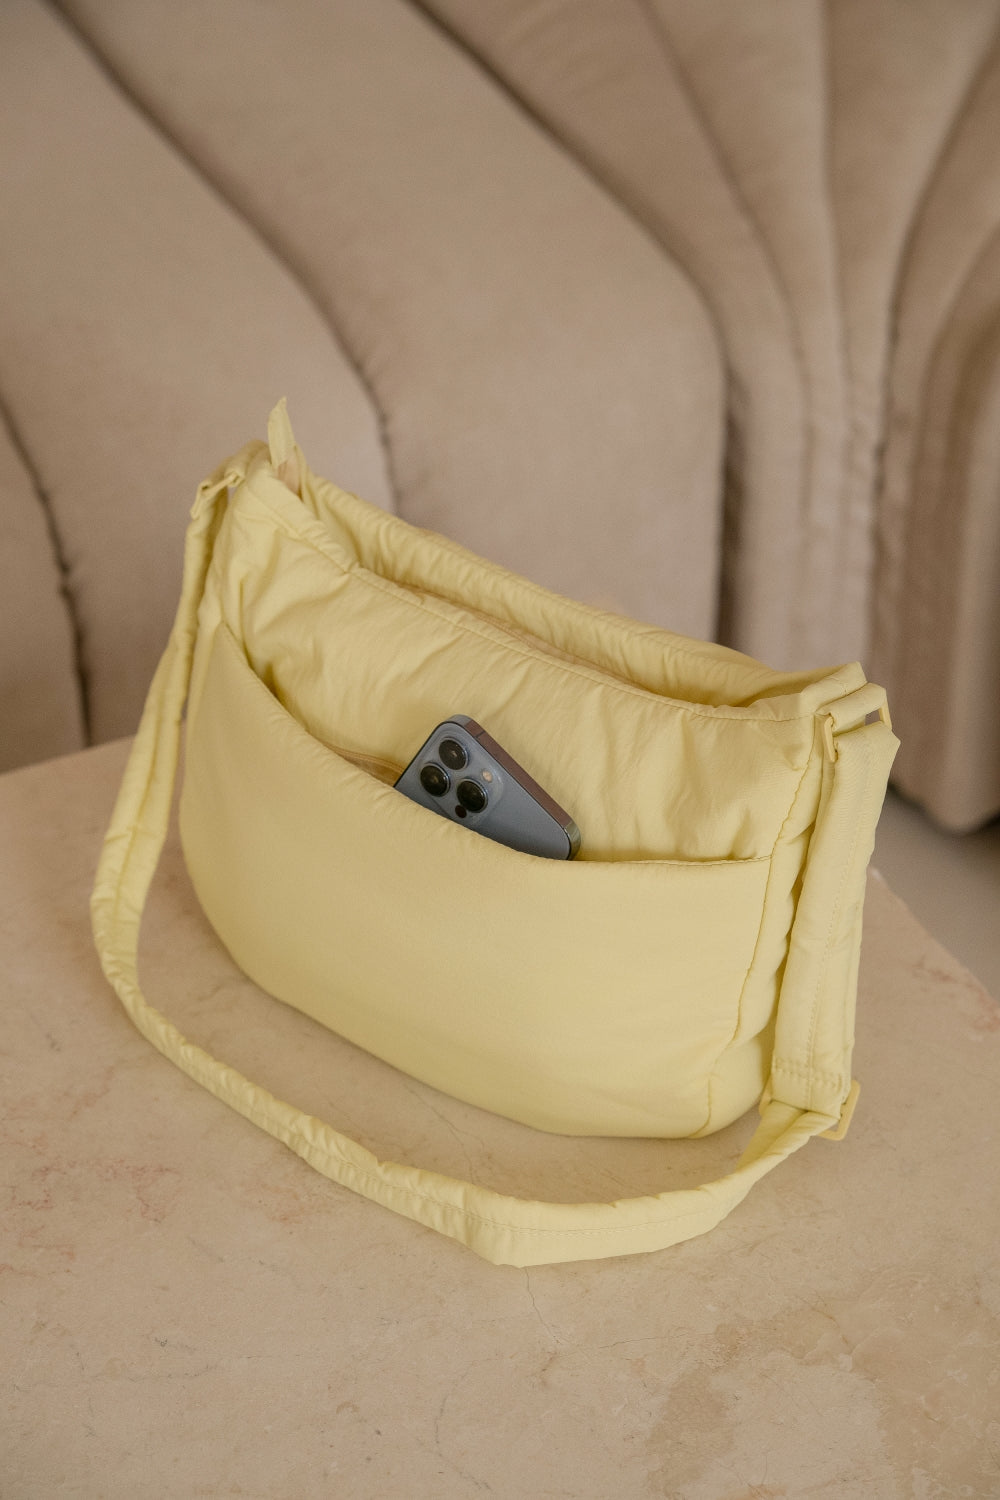 [BACKORDER] COSY PUFFY CROSSBODY BAG IN DAFFODIL - END OCT 2023 ARRIVAL